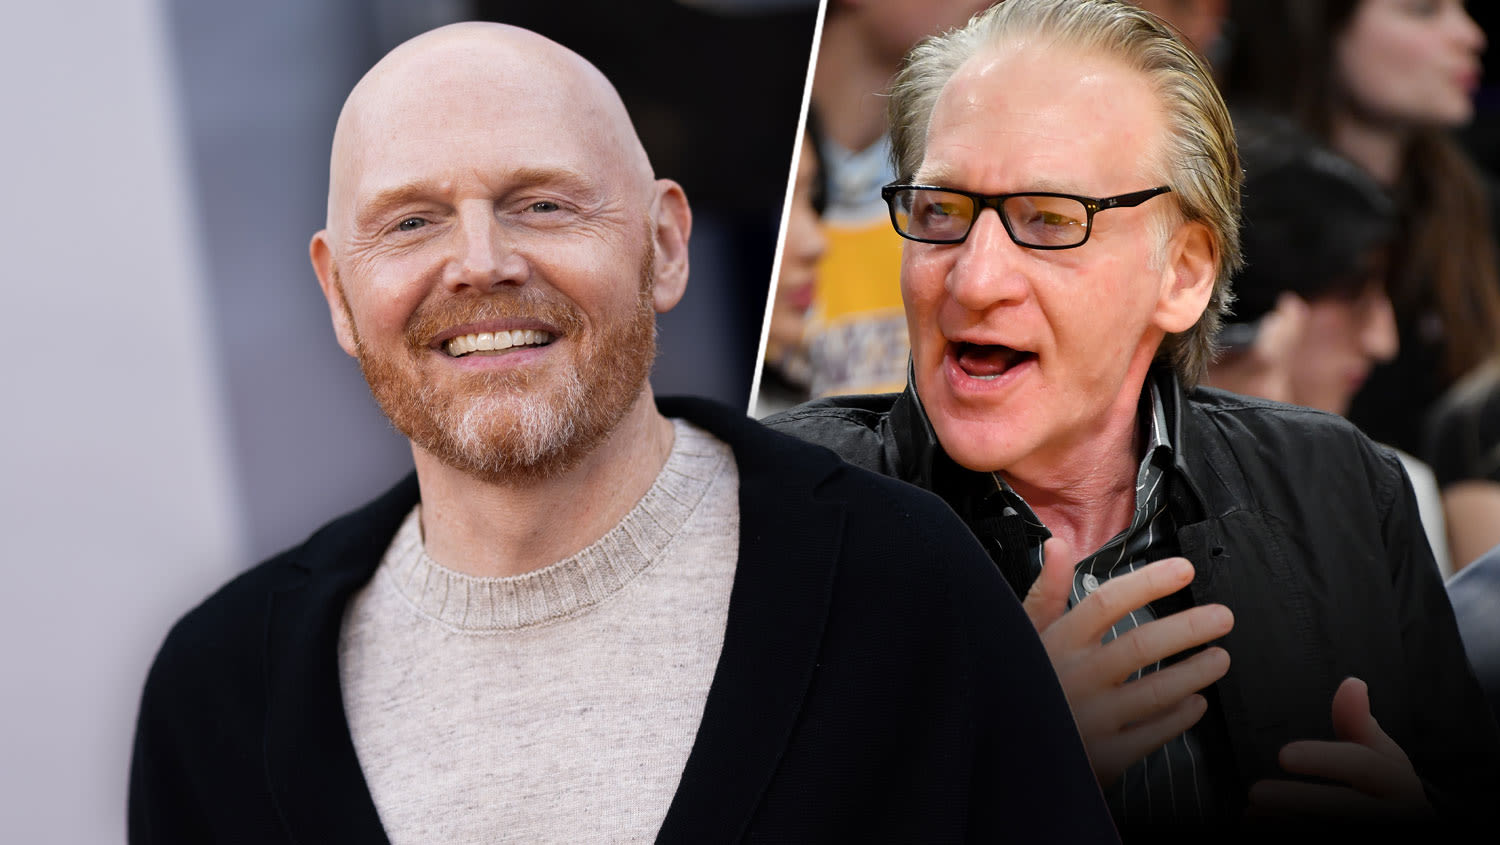 Bill Burr Says “Cancel Culture” Is “Over”; Bill Maher Suggests Louis C.K.’s Return As “It’s Been Long Enough”